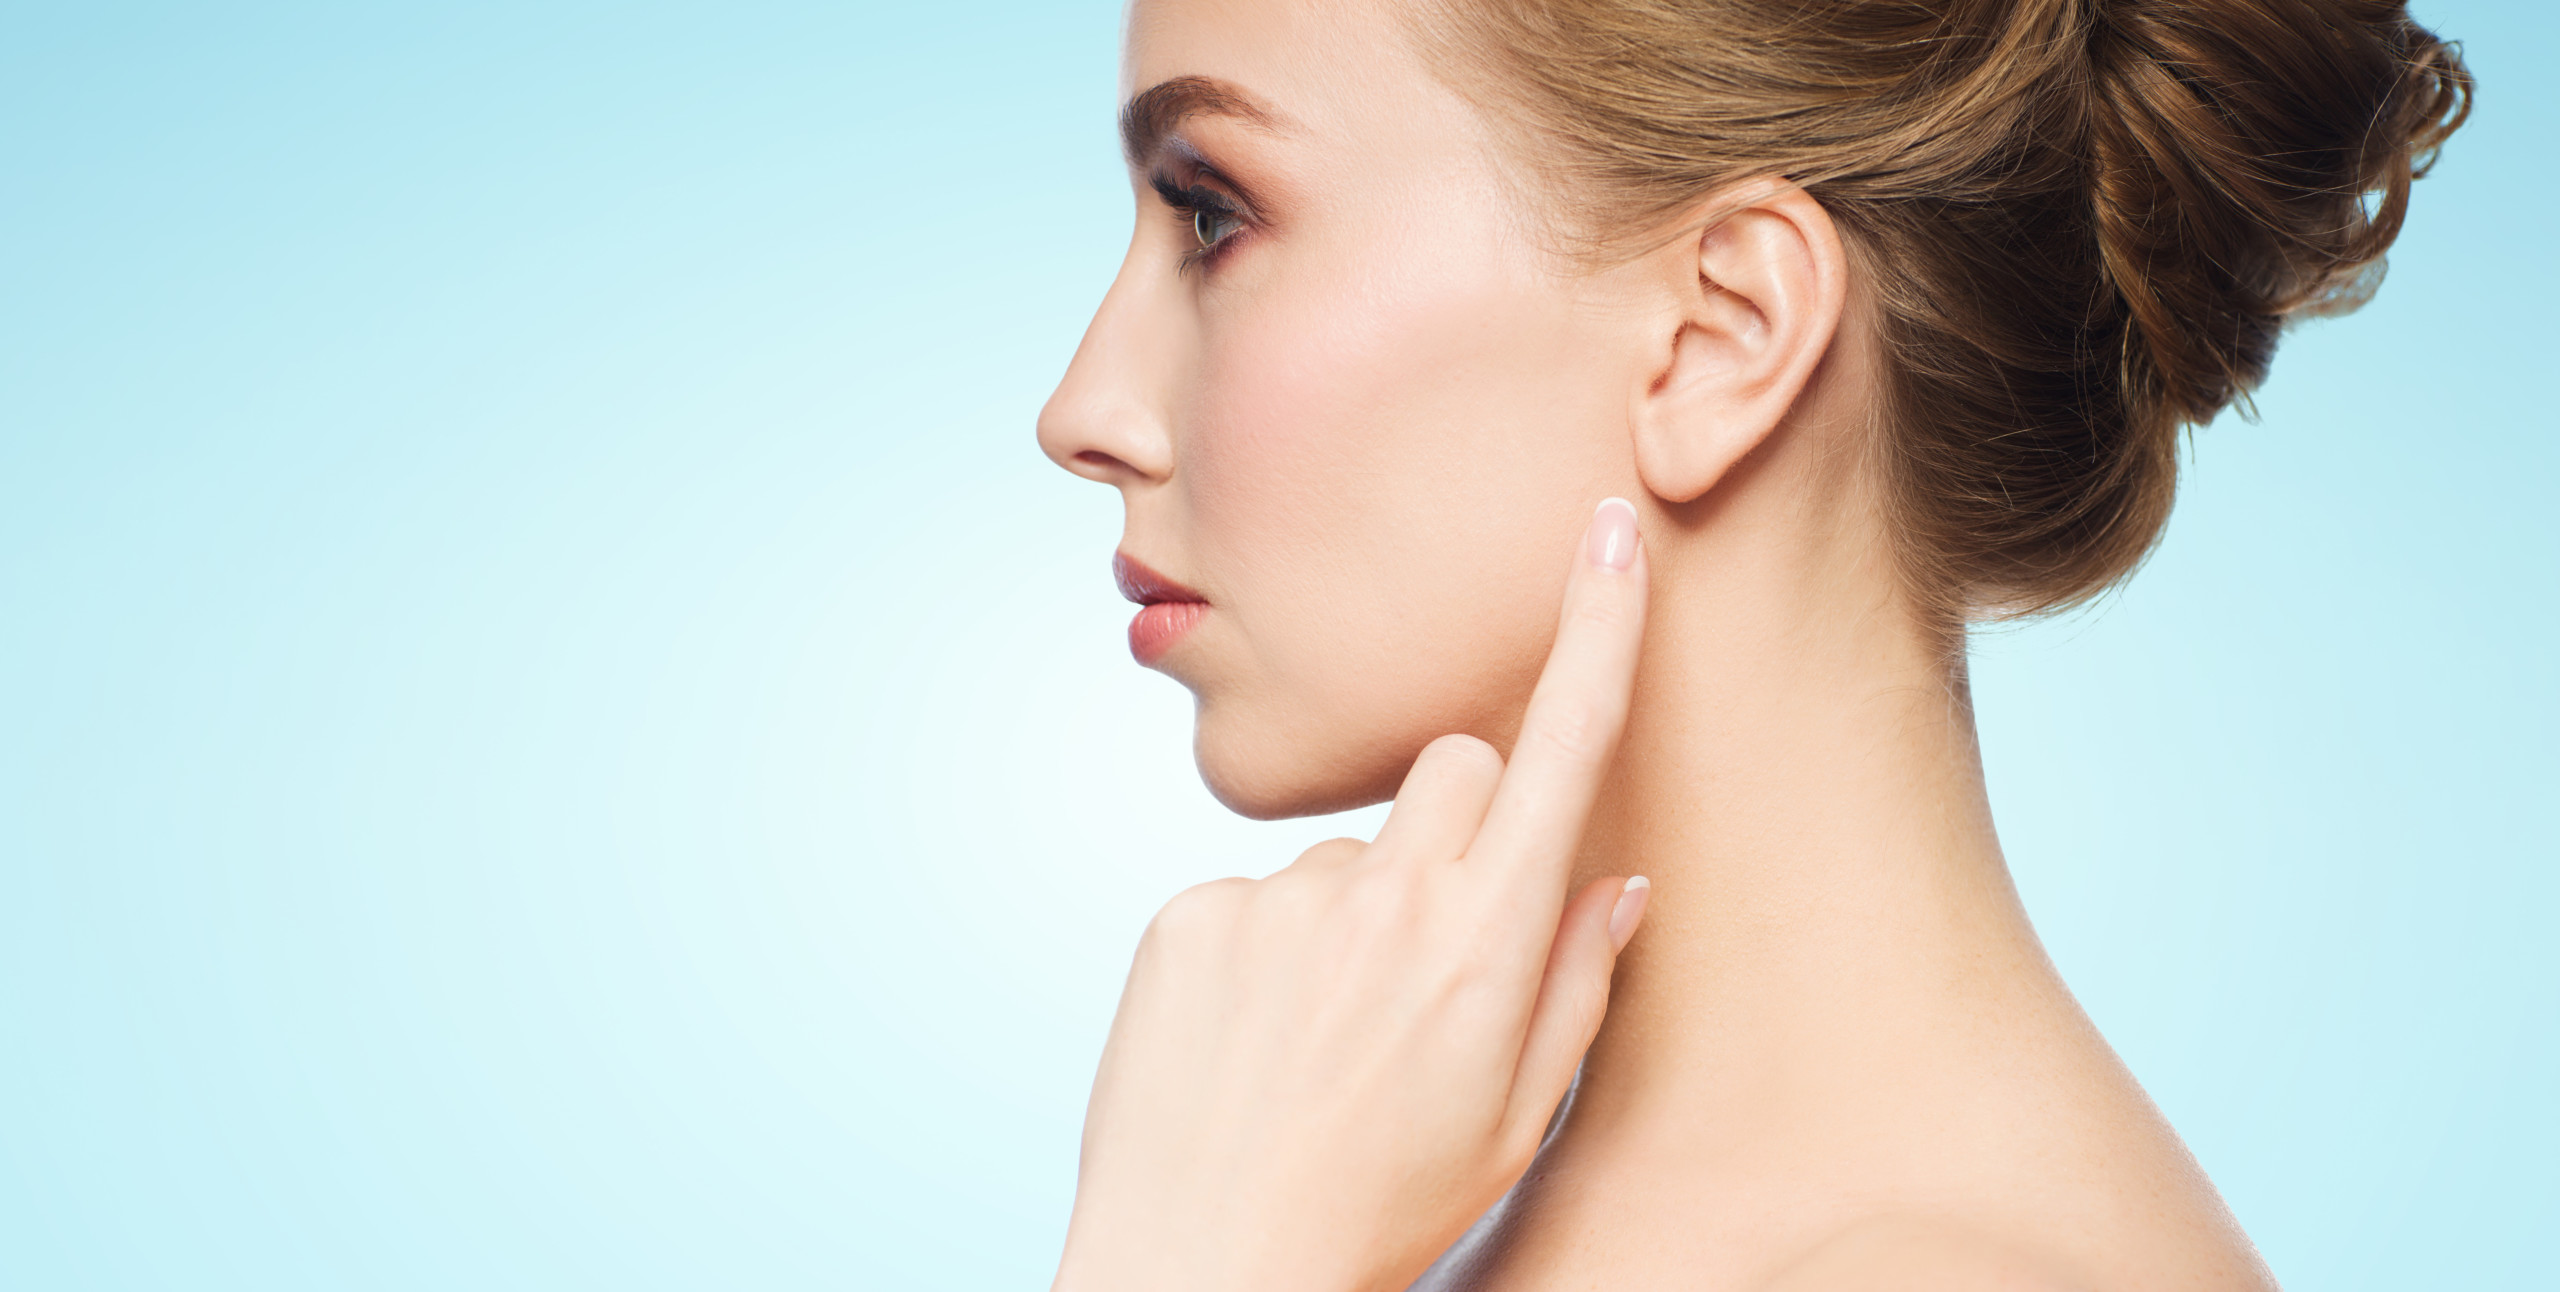 How To Fix Those Saggy Ear Lobes - Laura Young